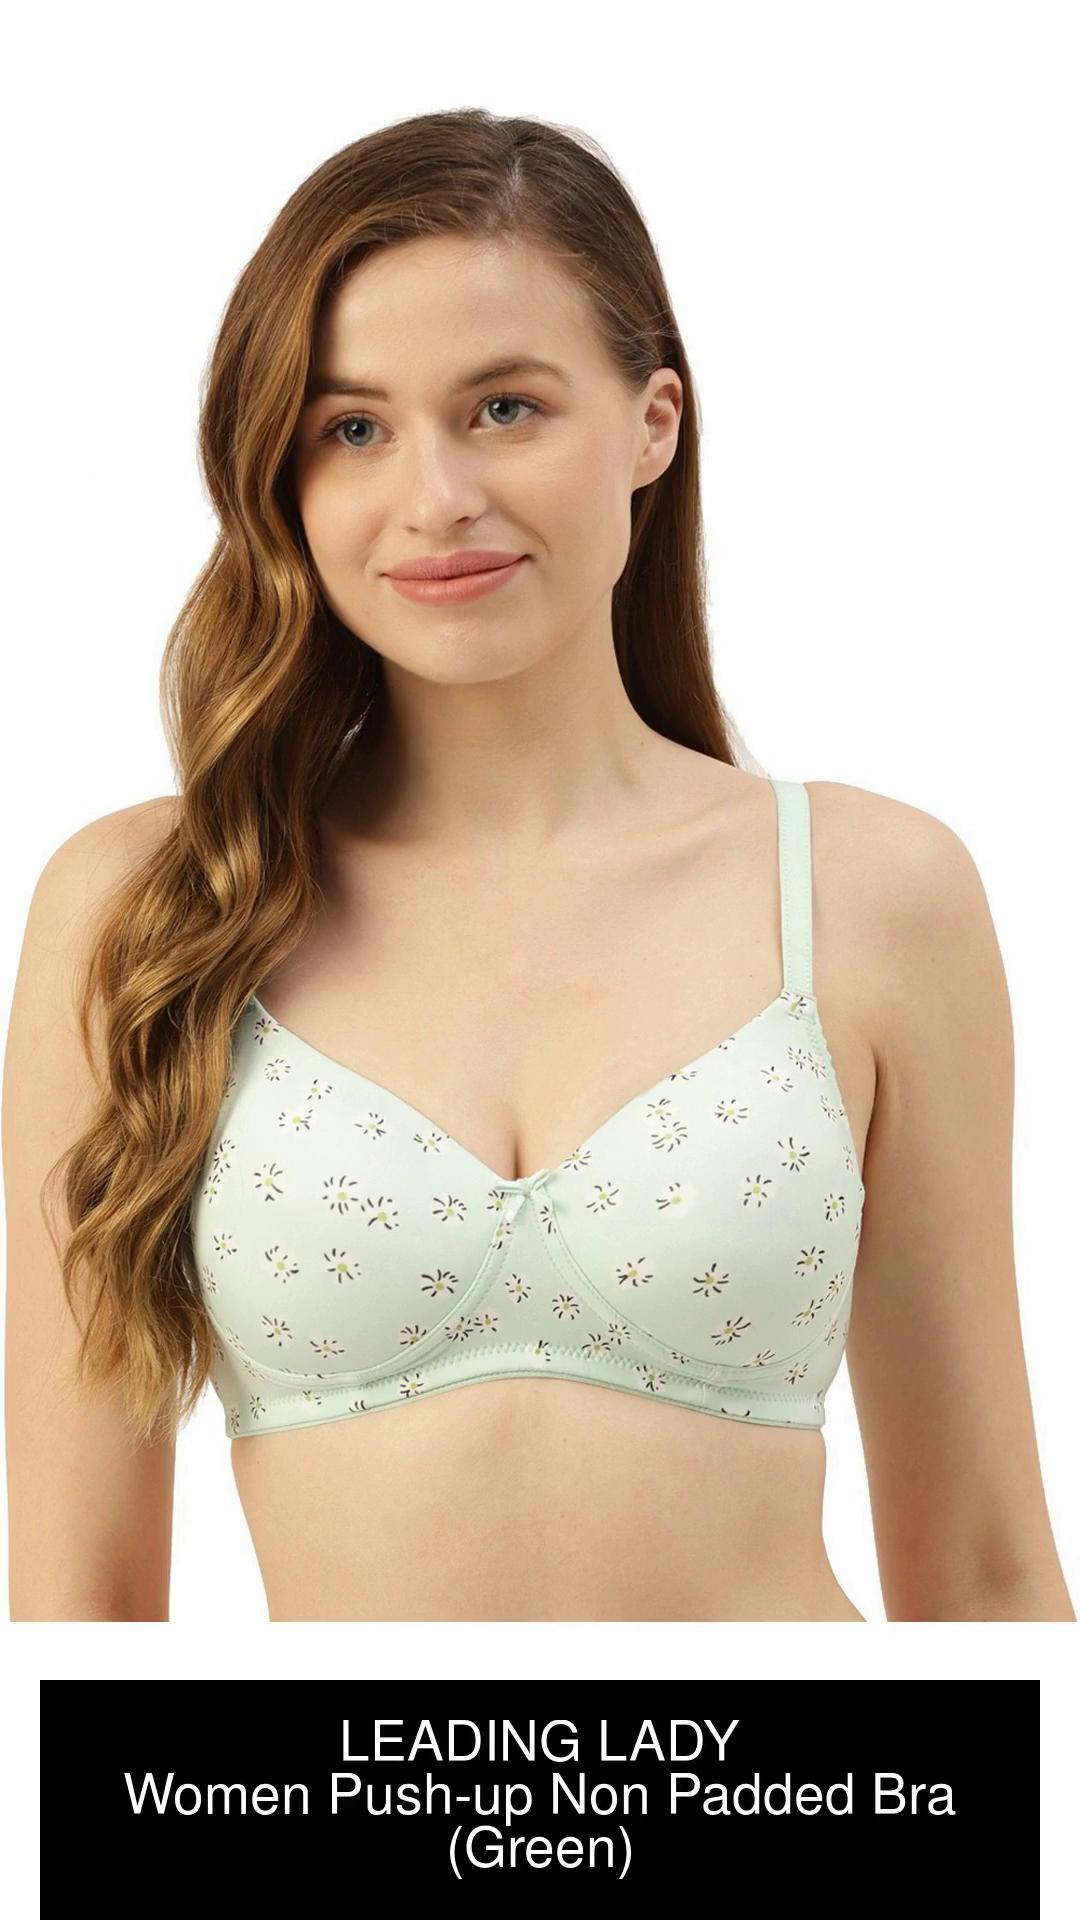 LEADING LADY Women Push-up Non Padded Bra - Buy LEADING LADY Women Push-up  Non Padded Bra Online at Best Prices in India